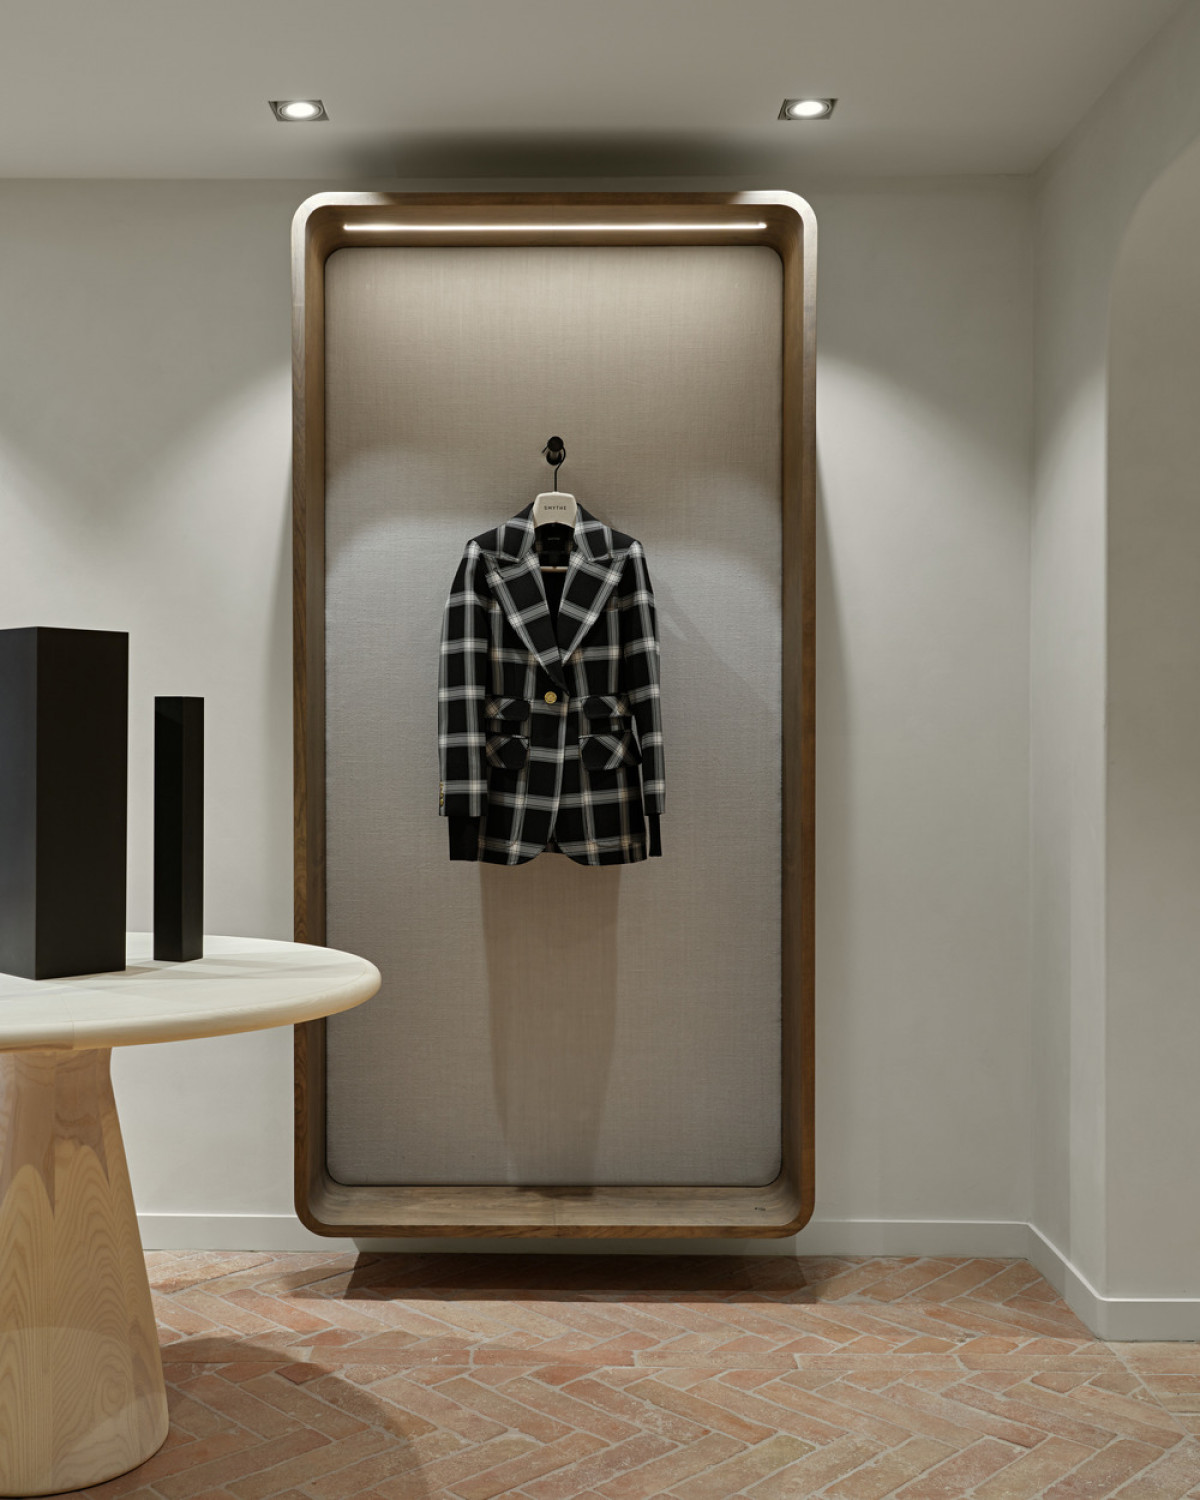 Wall-mounted feature boxes allow the sales team to easily style an outfit or show off a single garment.